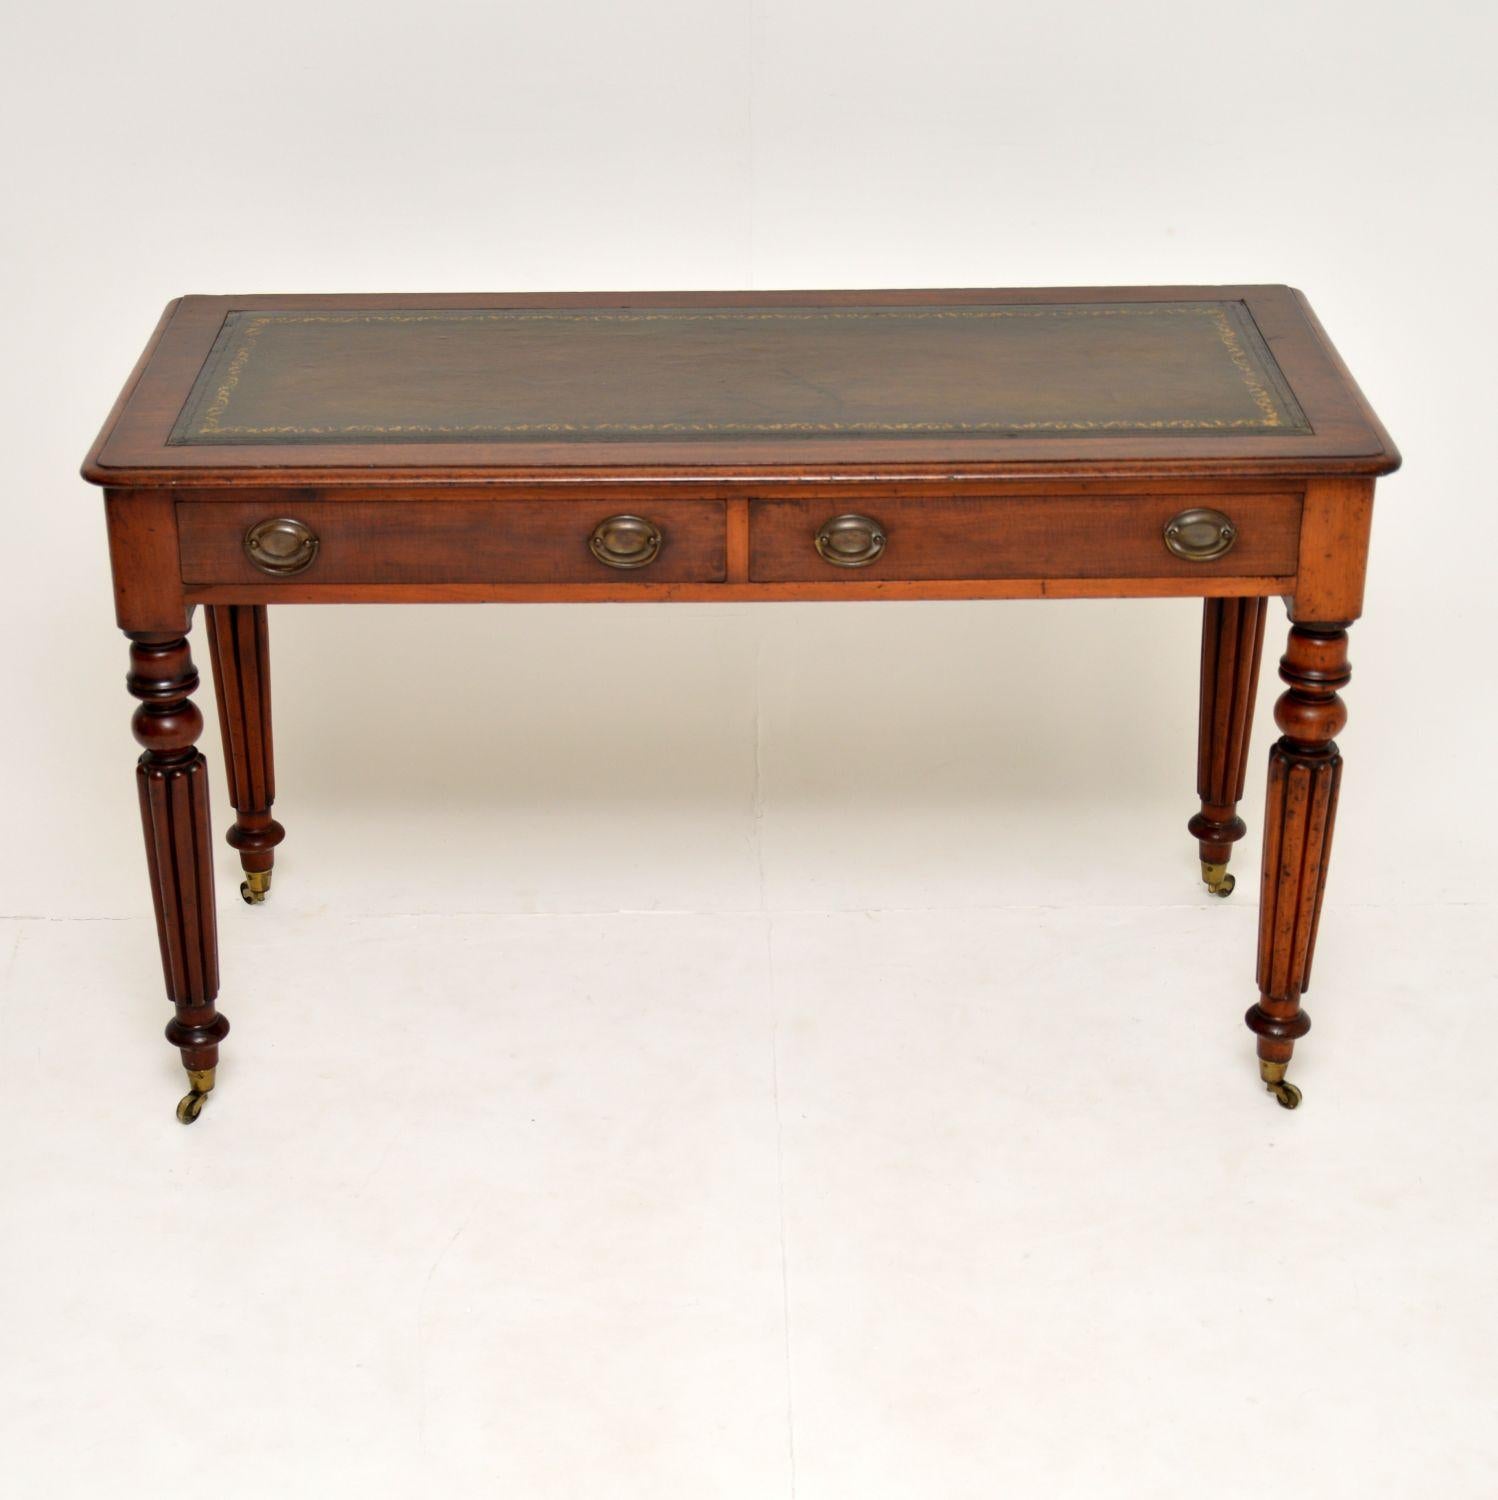 A very well made antique writing table or desk in solid mahogany. This dates from circa 1830s-1840s period.

It has well turned and fluted legs of fantastic quality. It sits on original brass casters, and has brass handles on the drawers.

The